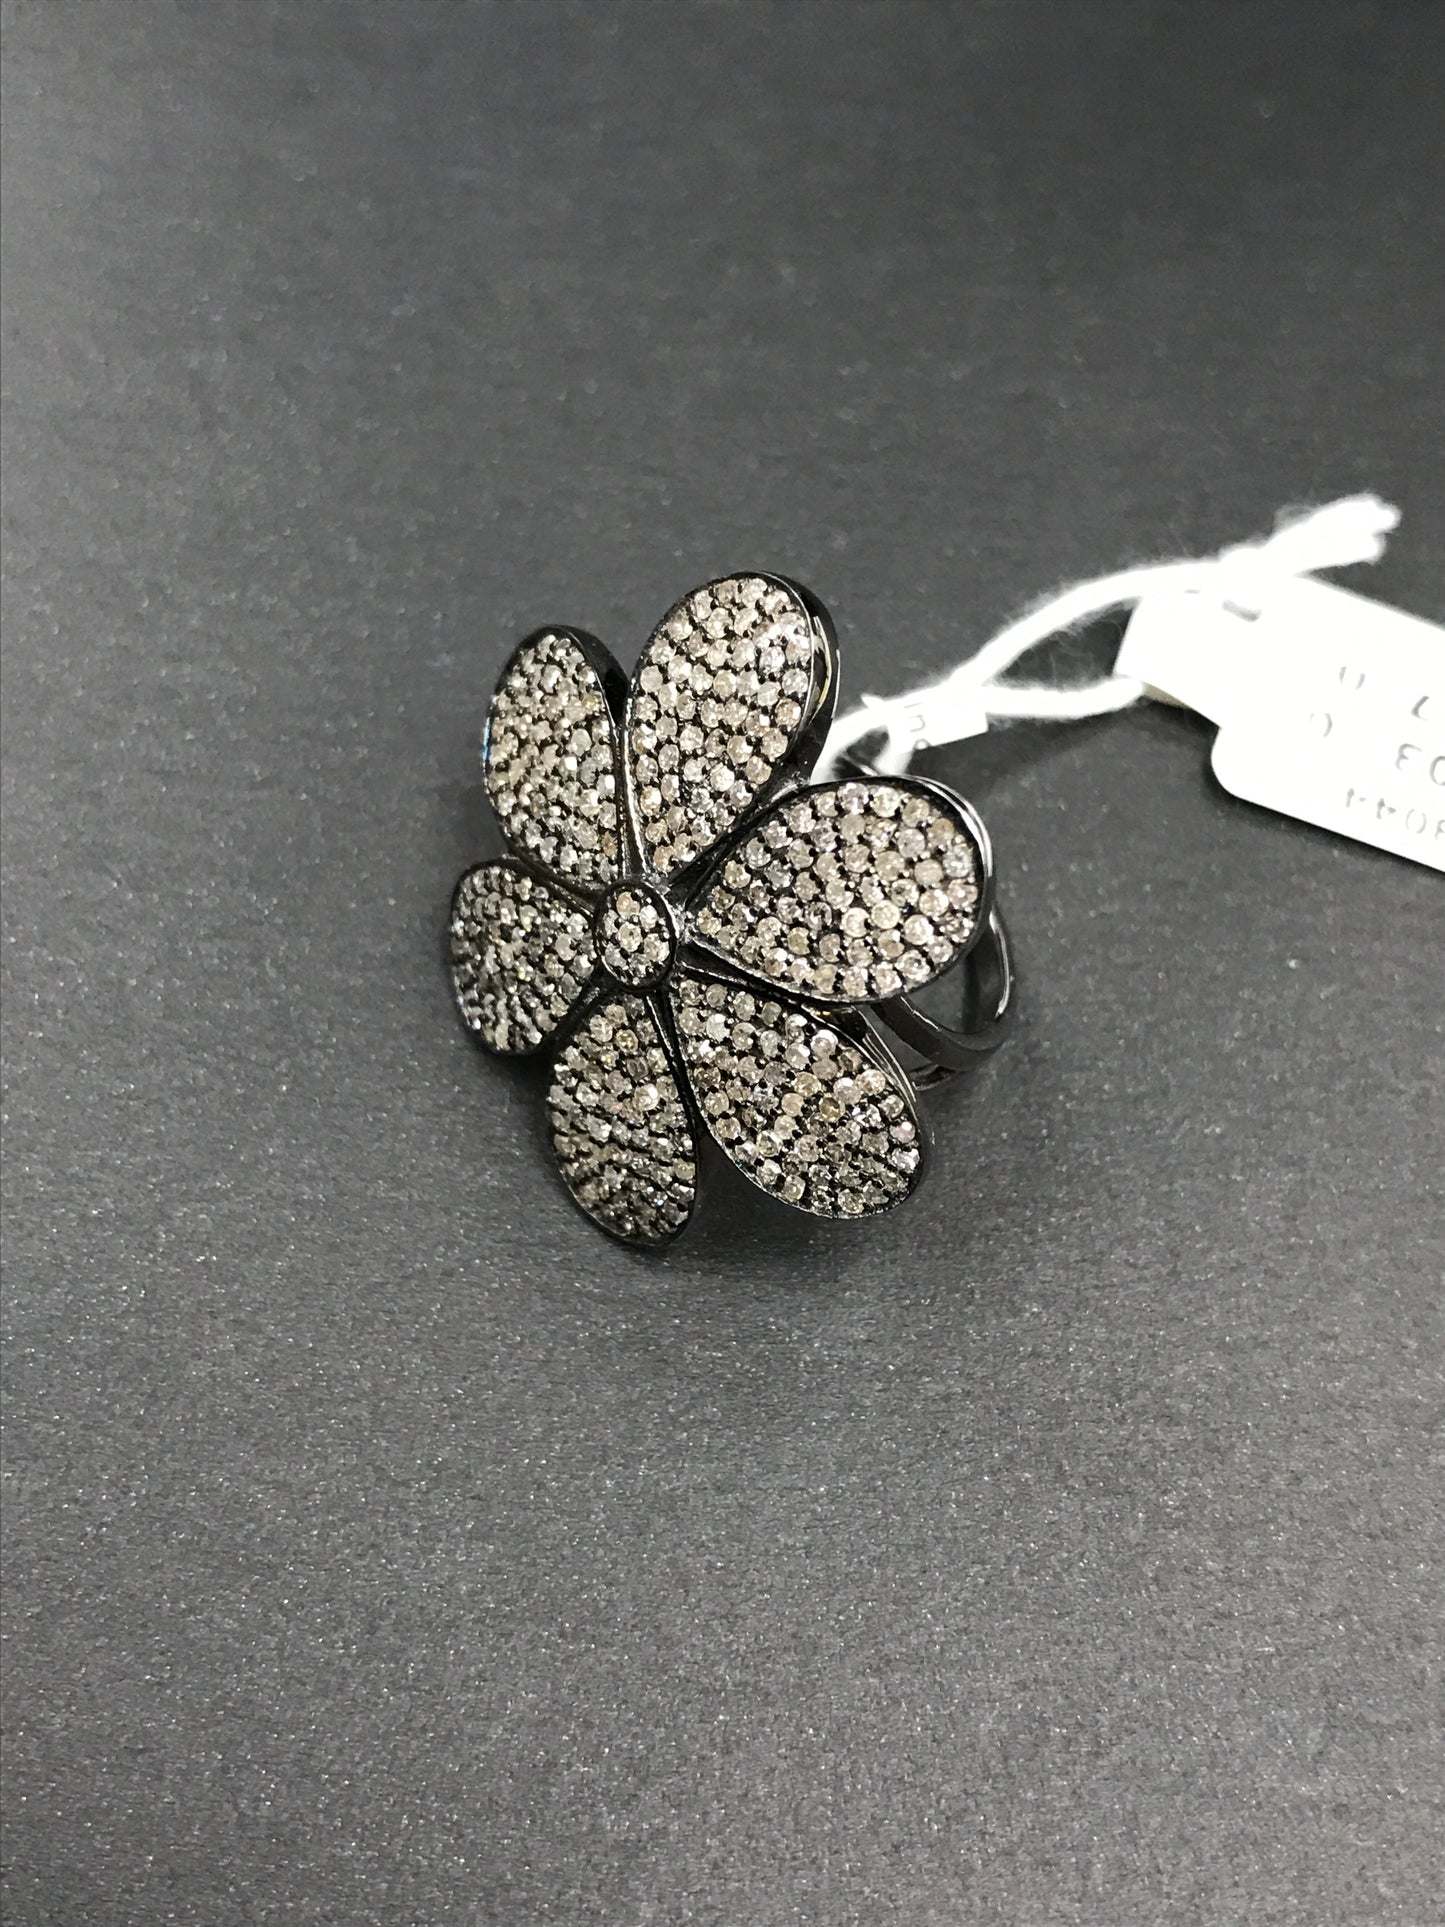 Diamond  Flower Diamond Ring, Pave Diamond Ring, Pave Flower Ring, Approx 29 x 29mm. Sterling Silver